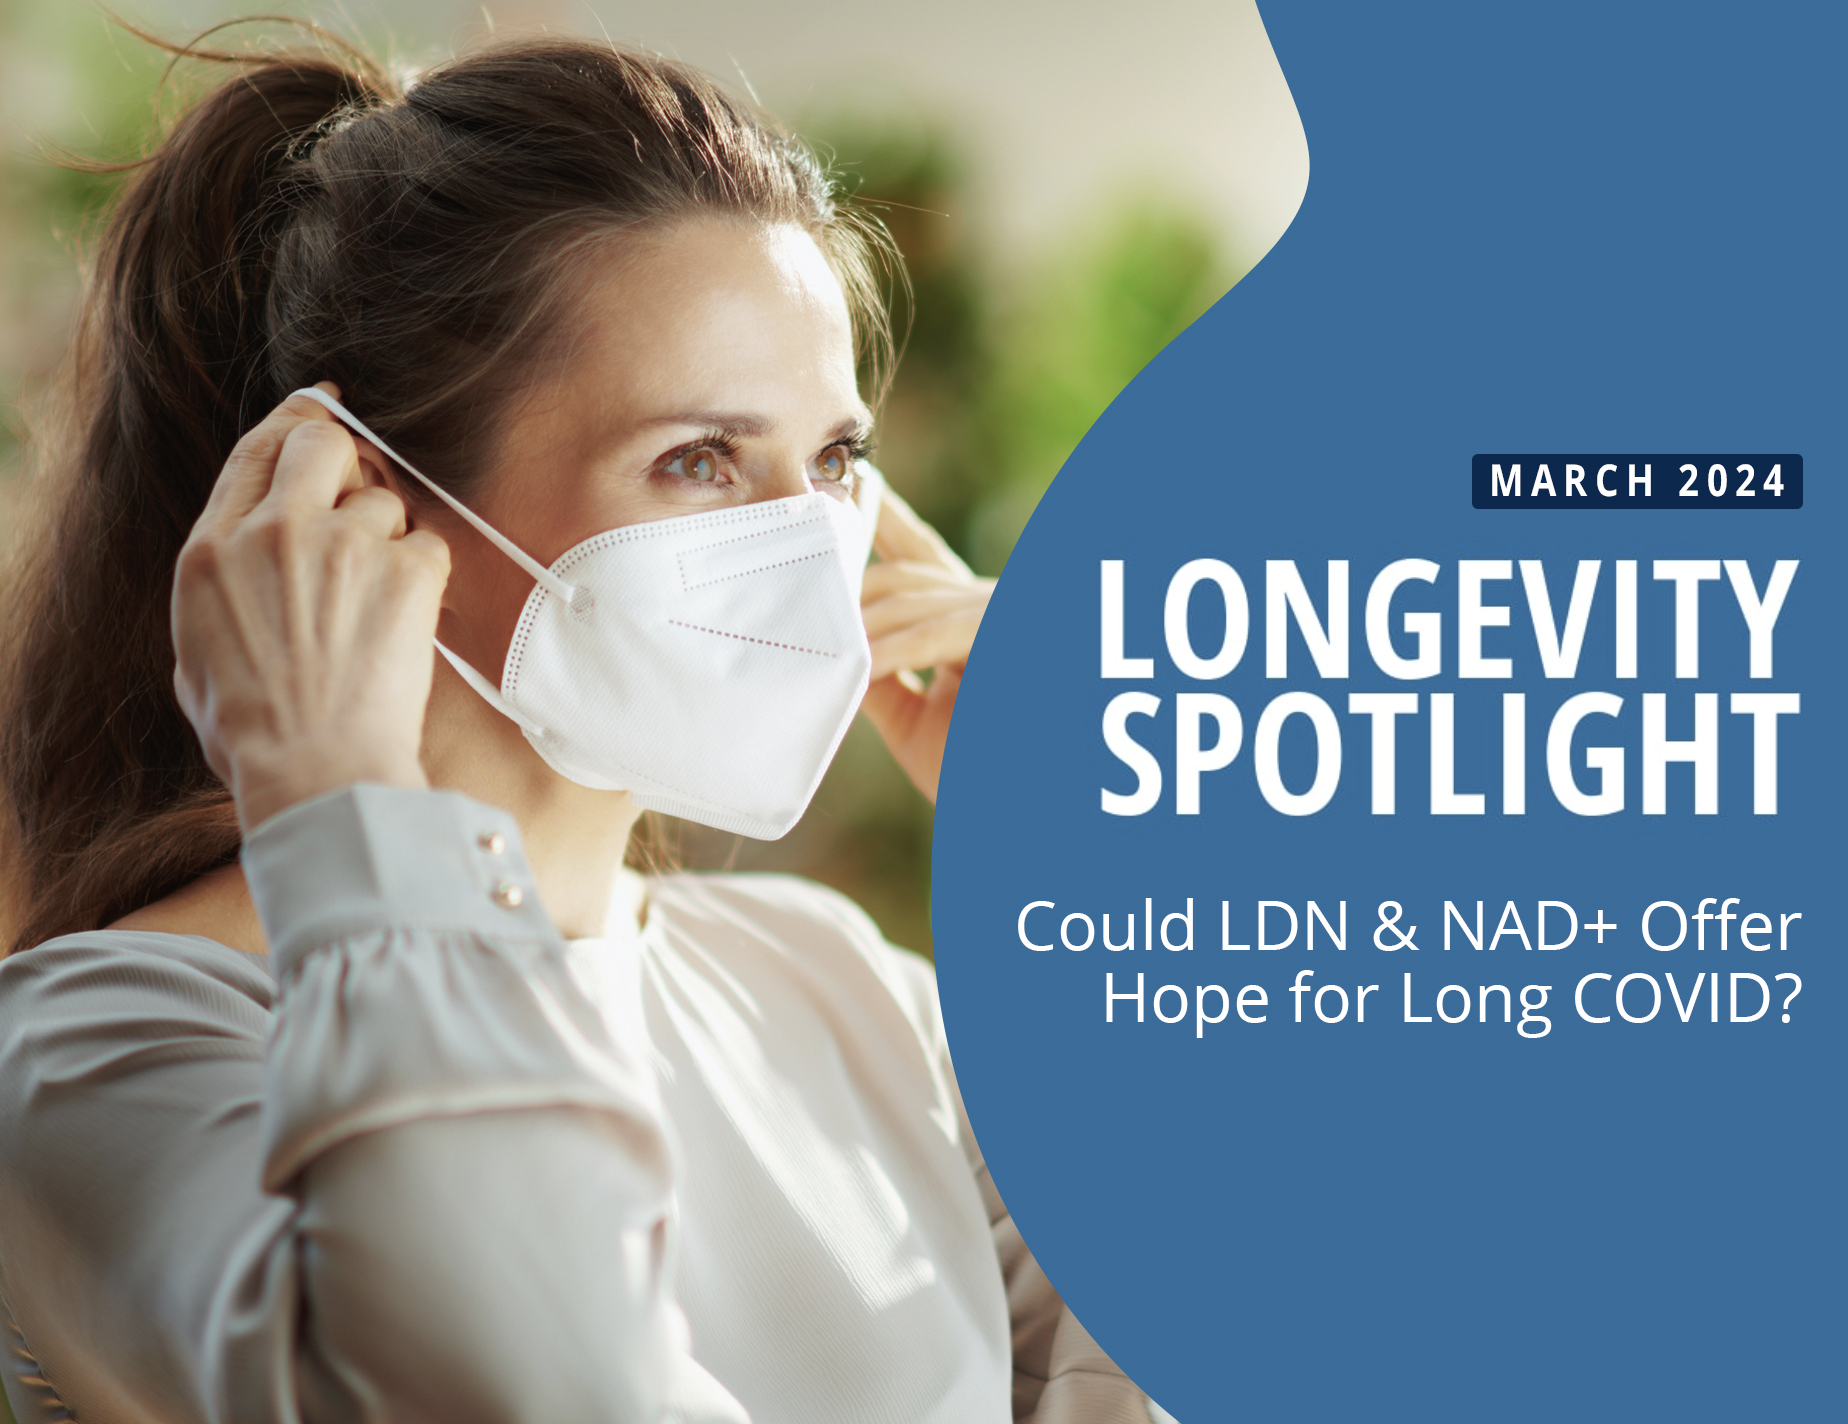 Could LDN & NAD+ Offer Hope for Long COVID?